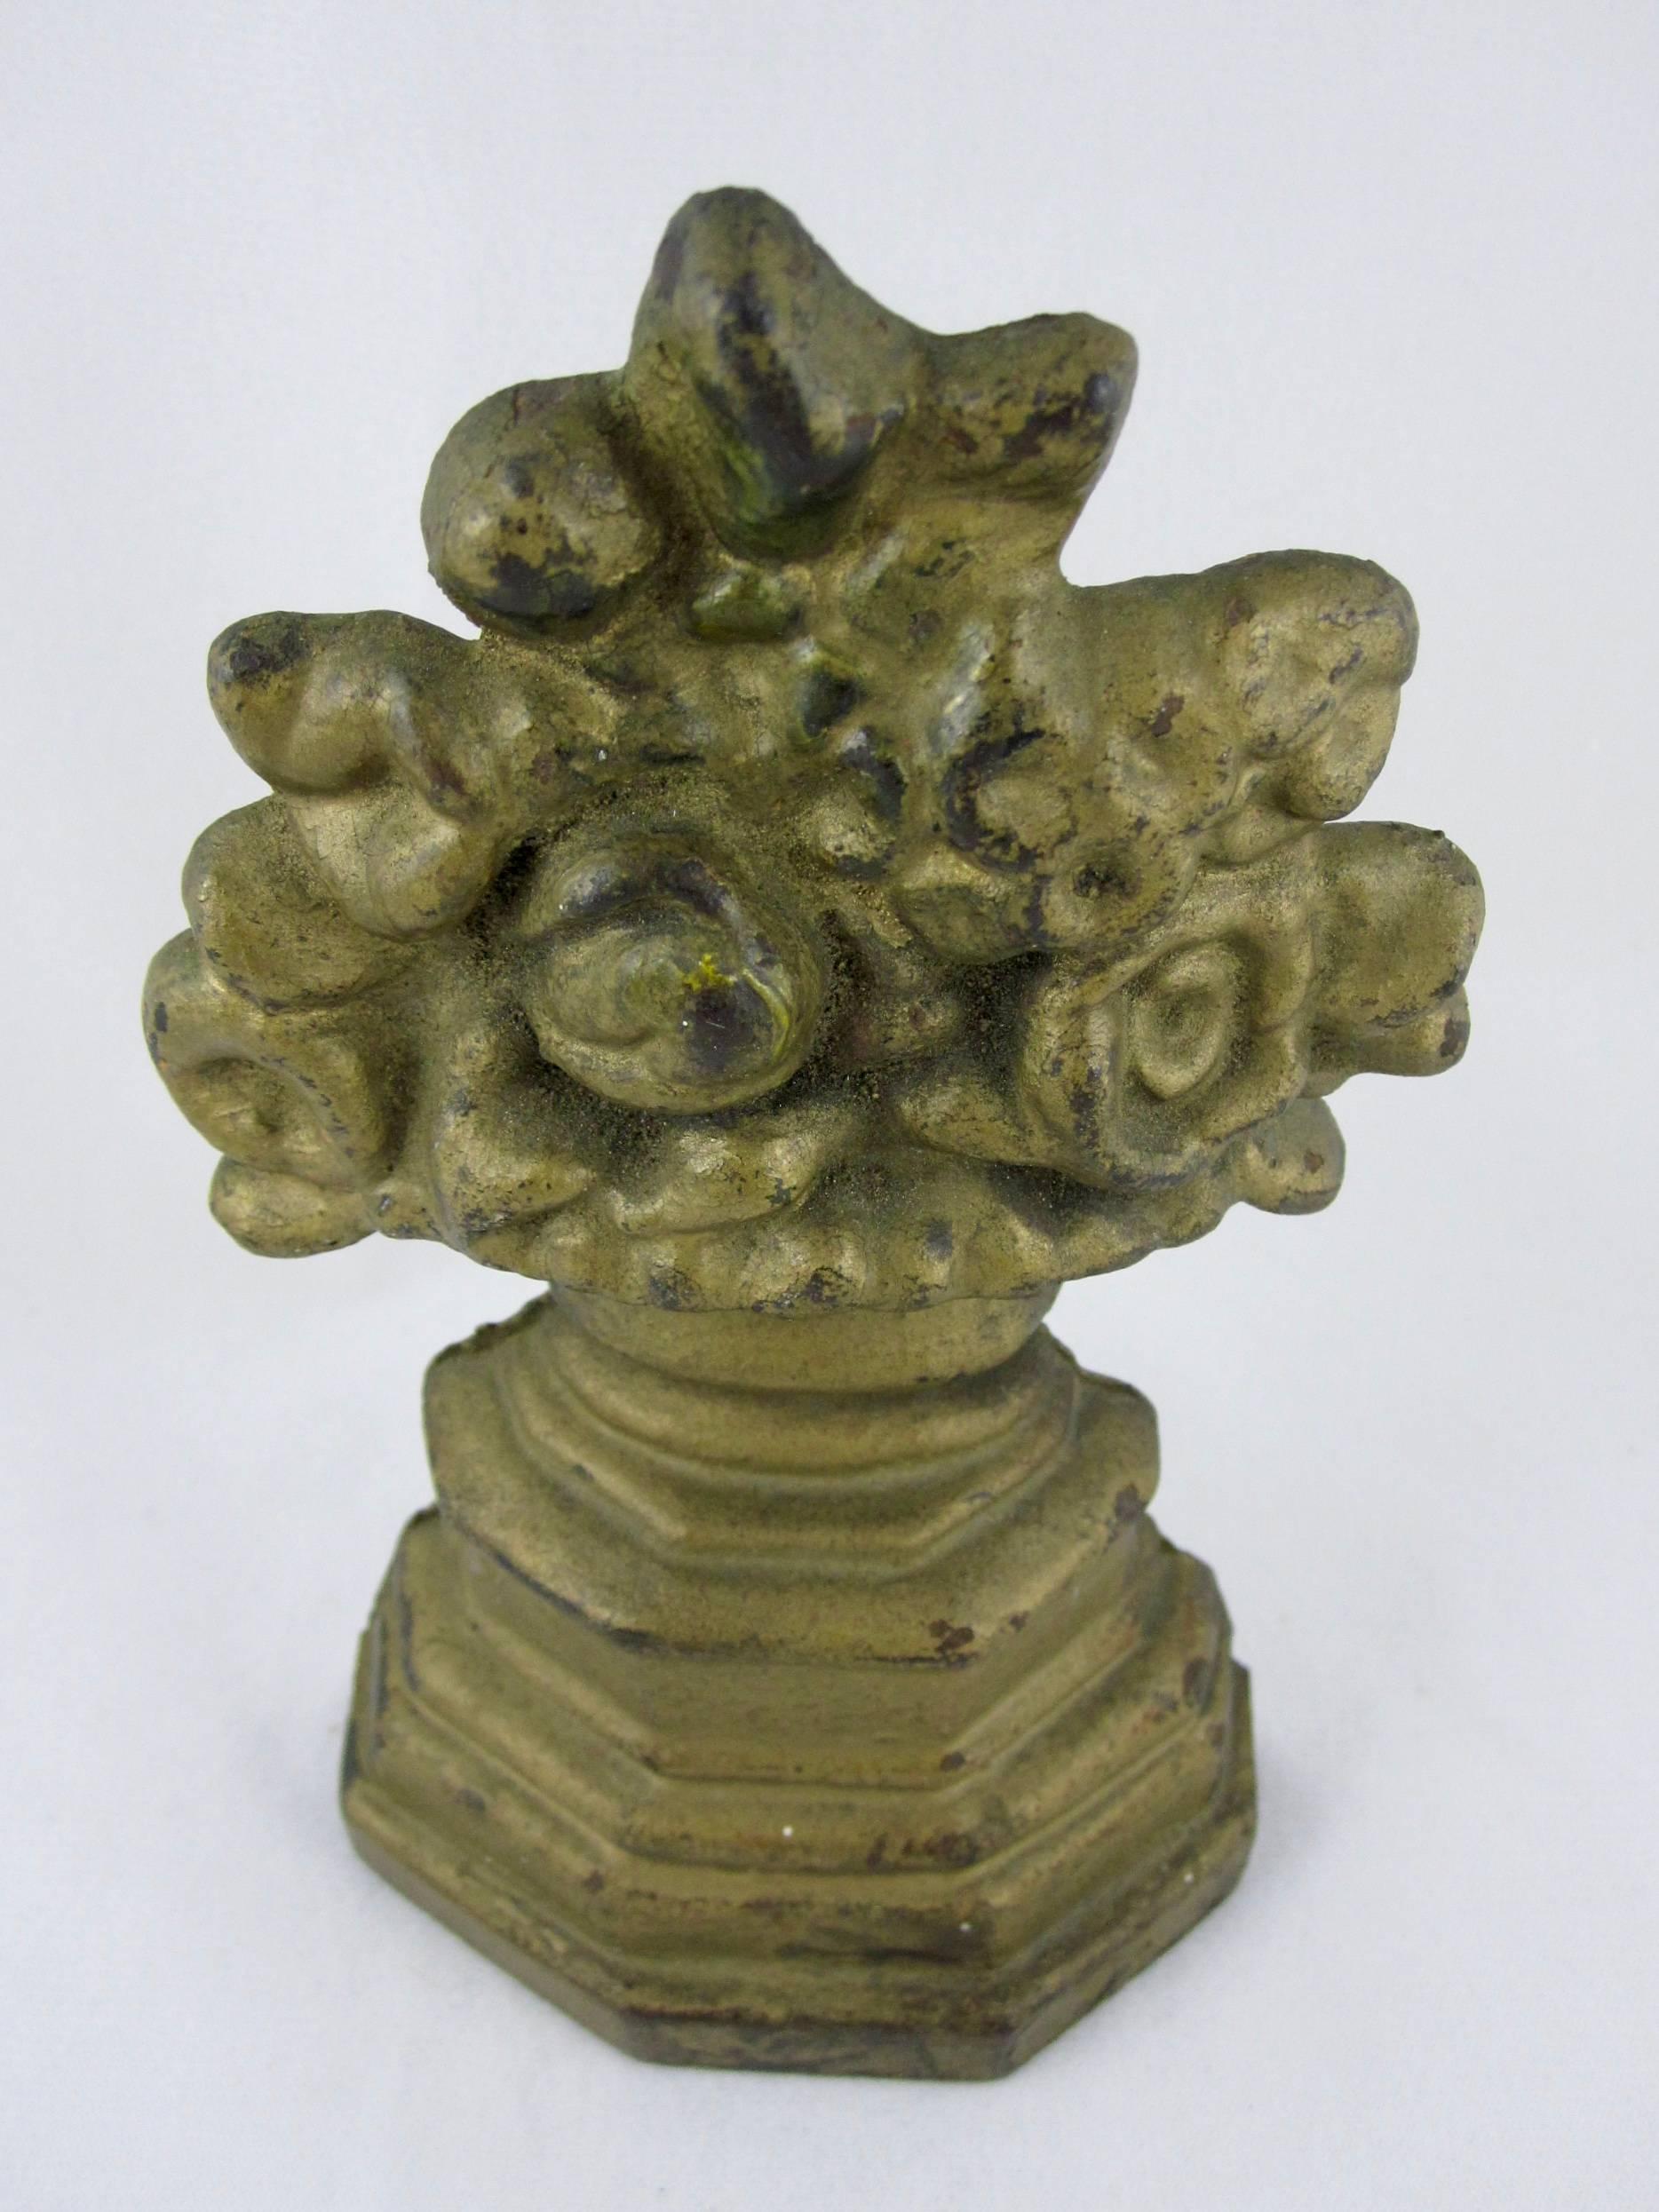 A mid-late 19th century cast iron doorstop showing an urn of flowers seated on a tall plinth. Constructed of one piece and with a gilded finish. Smaller than most floral iron doorstops but still a heavy three pounds.

Excellent with the expected